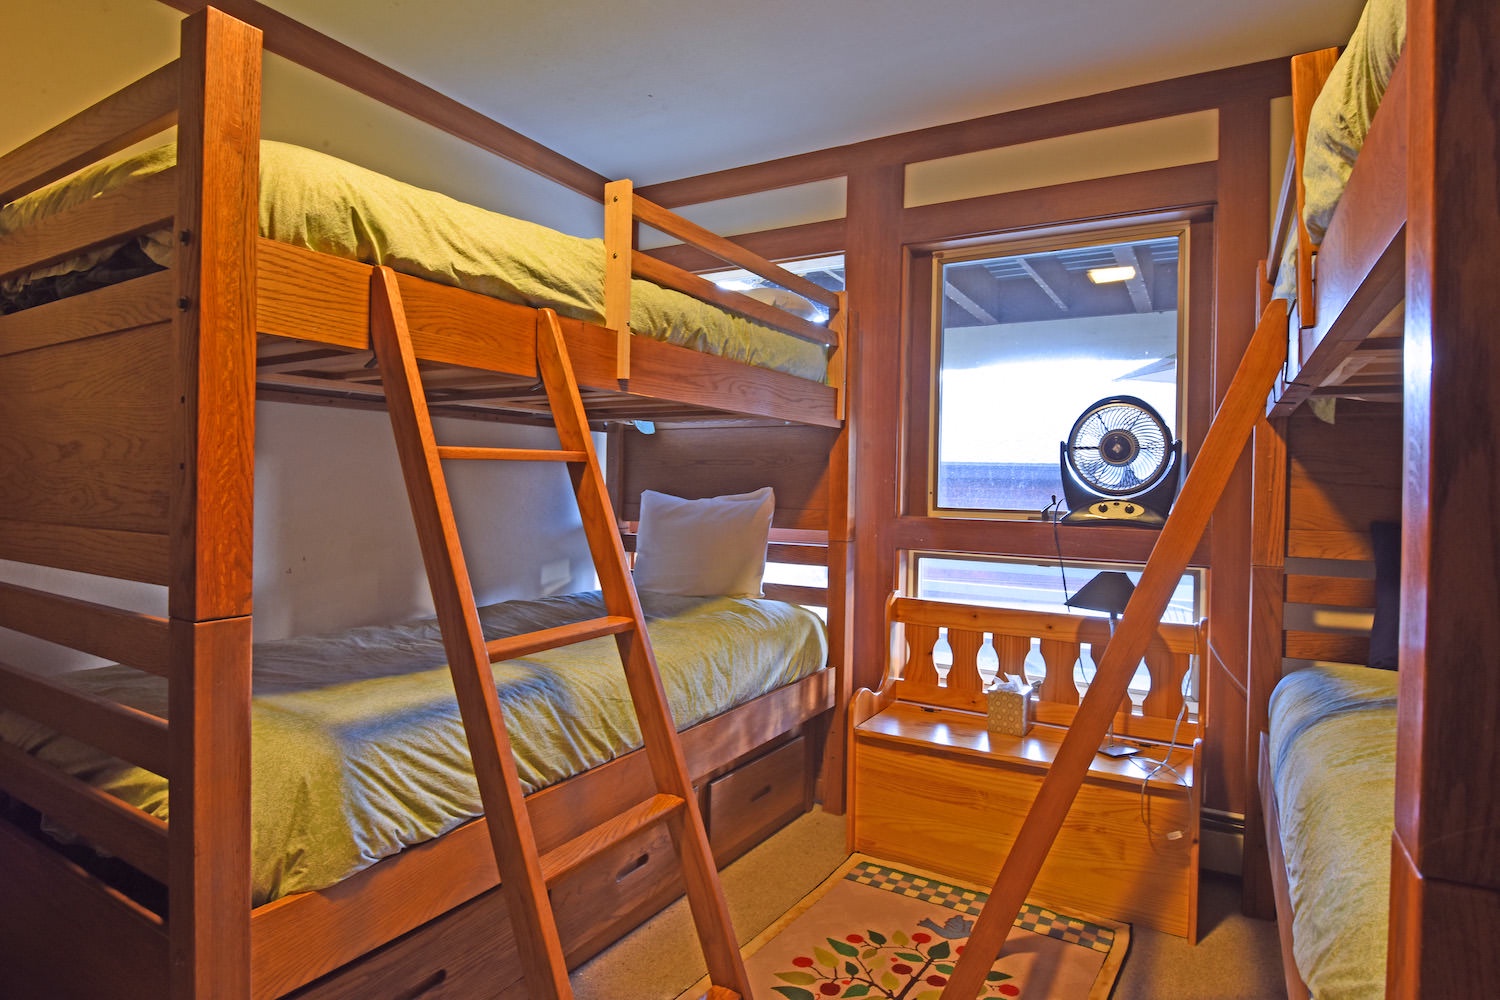 5th bedroom: bunkbeds, great for kids or groups